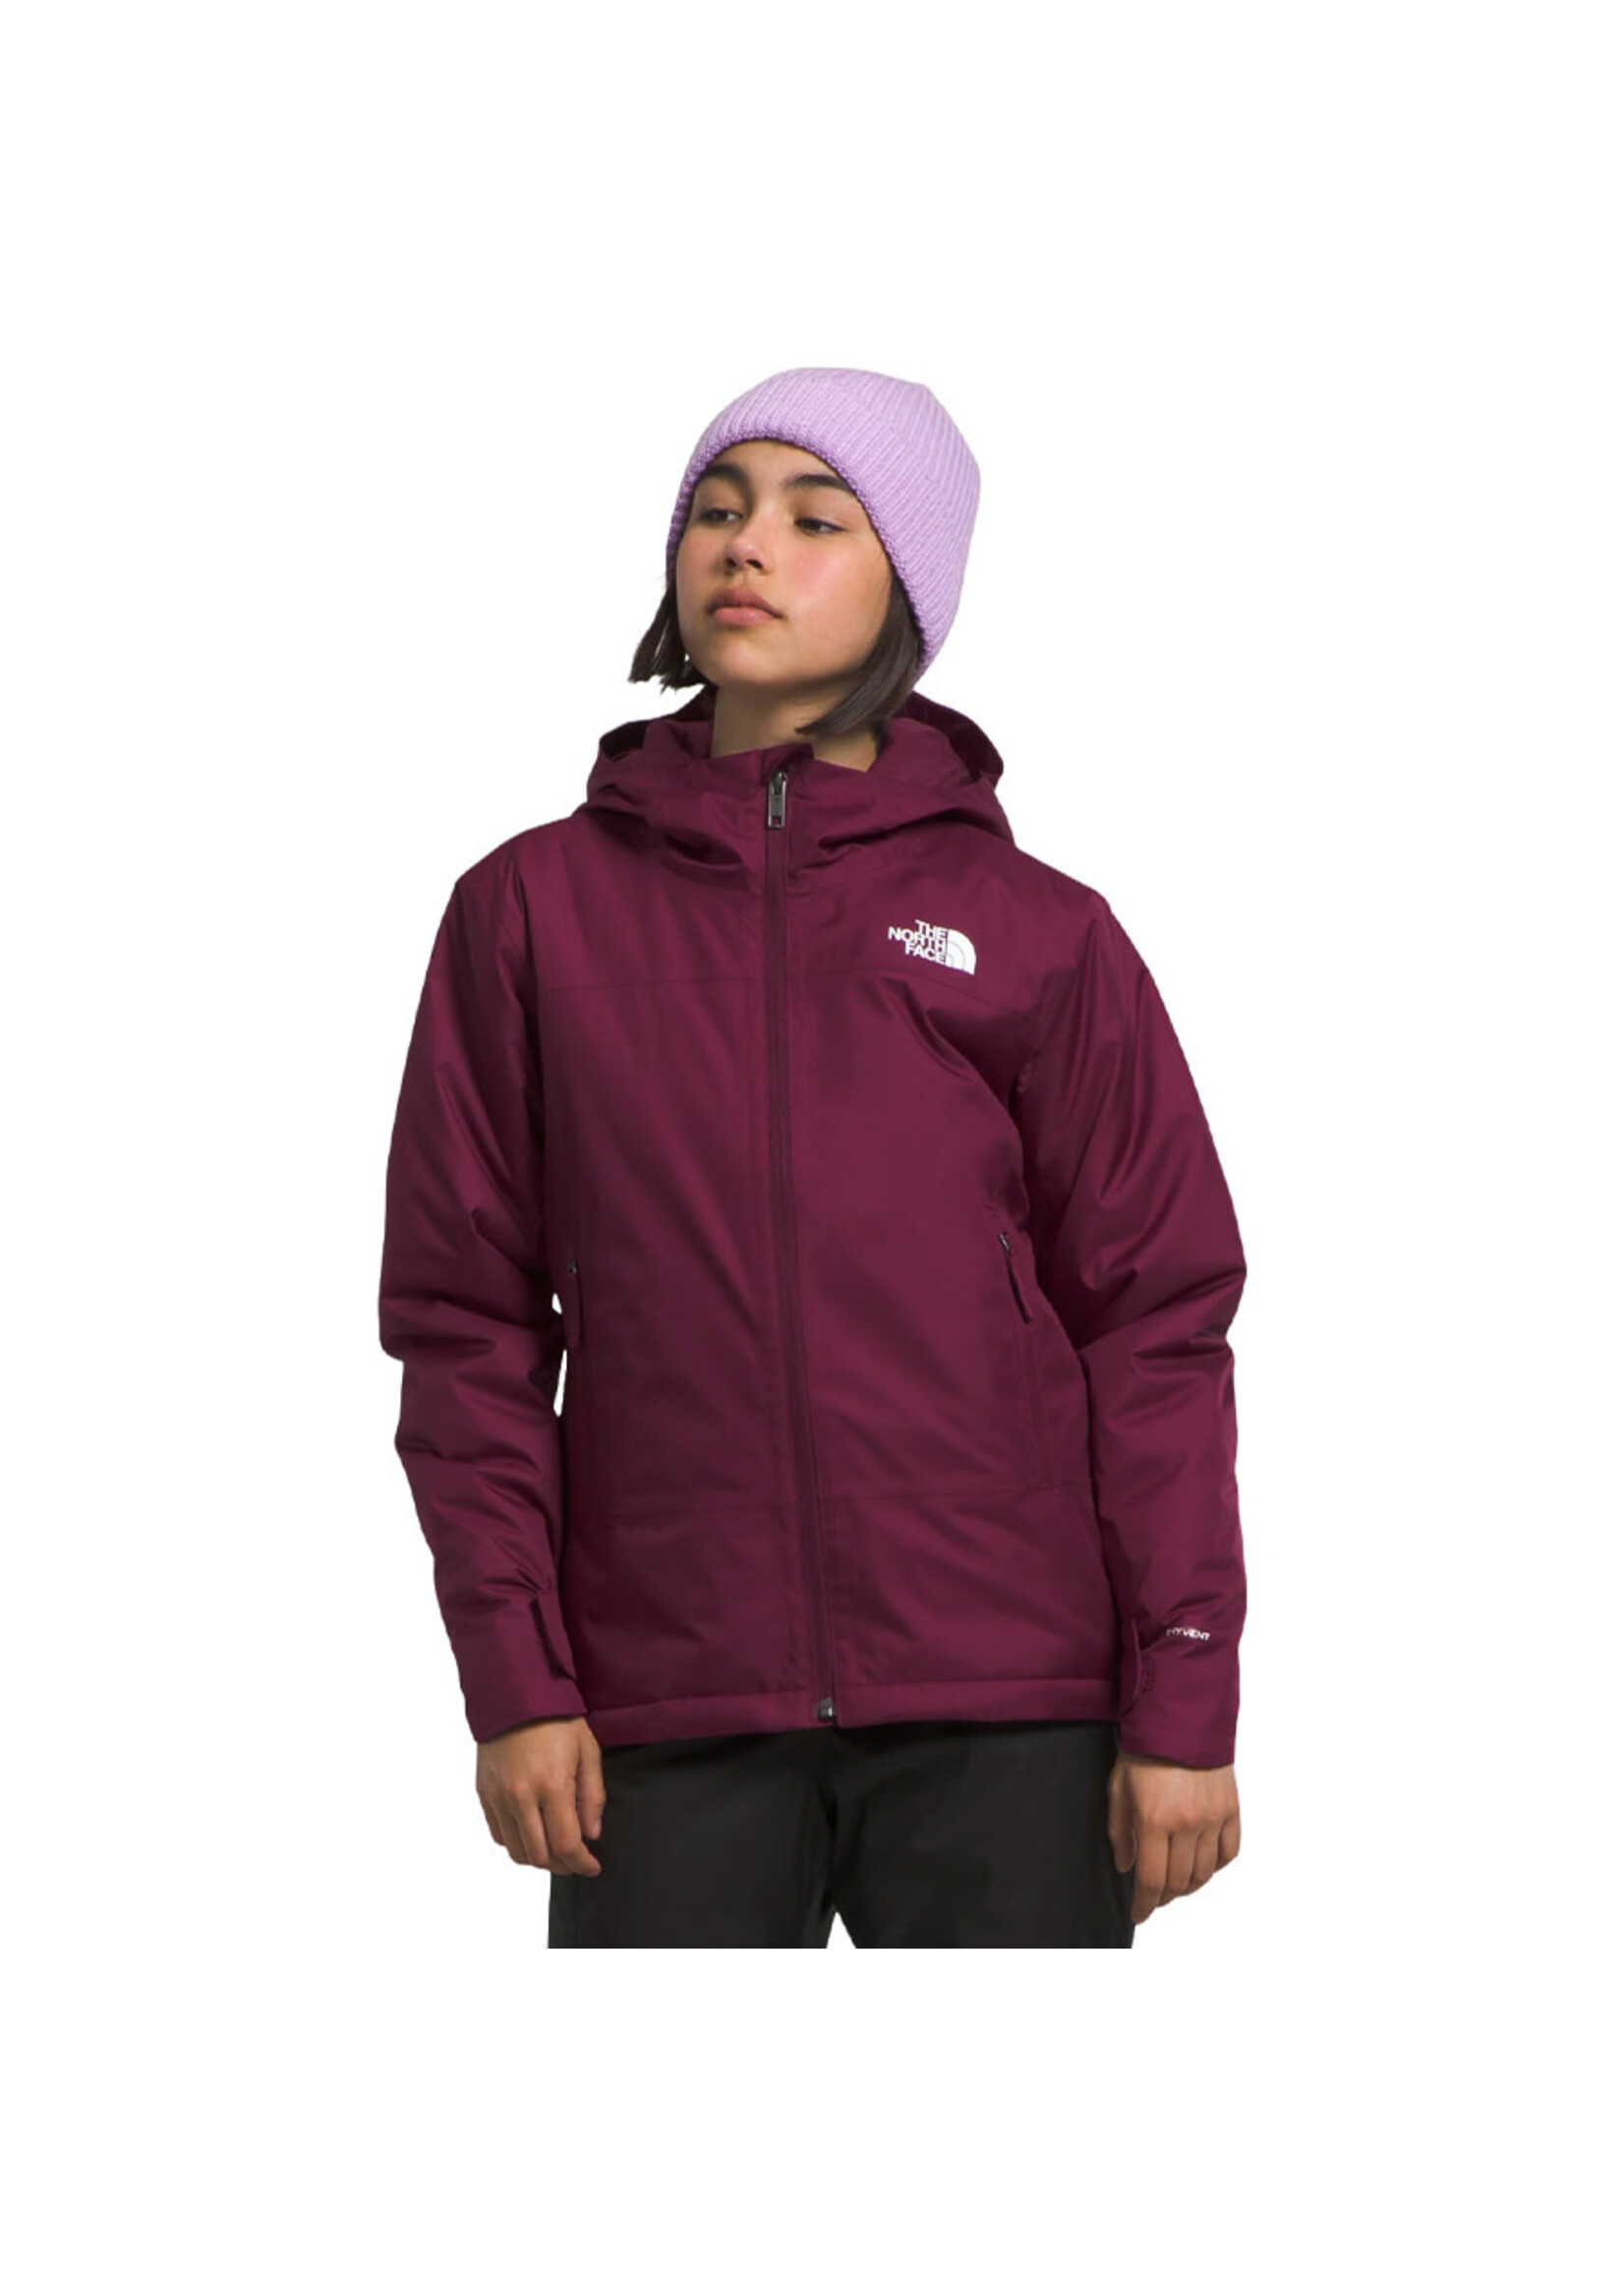 THE NORTH FACE Veste isolée FREEDOM / Rose Boysenberry